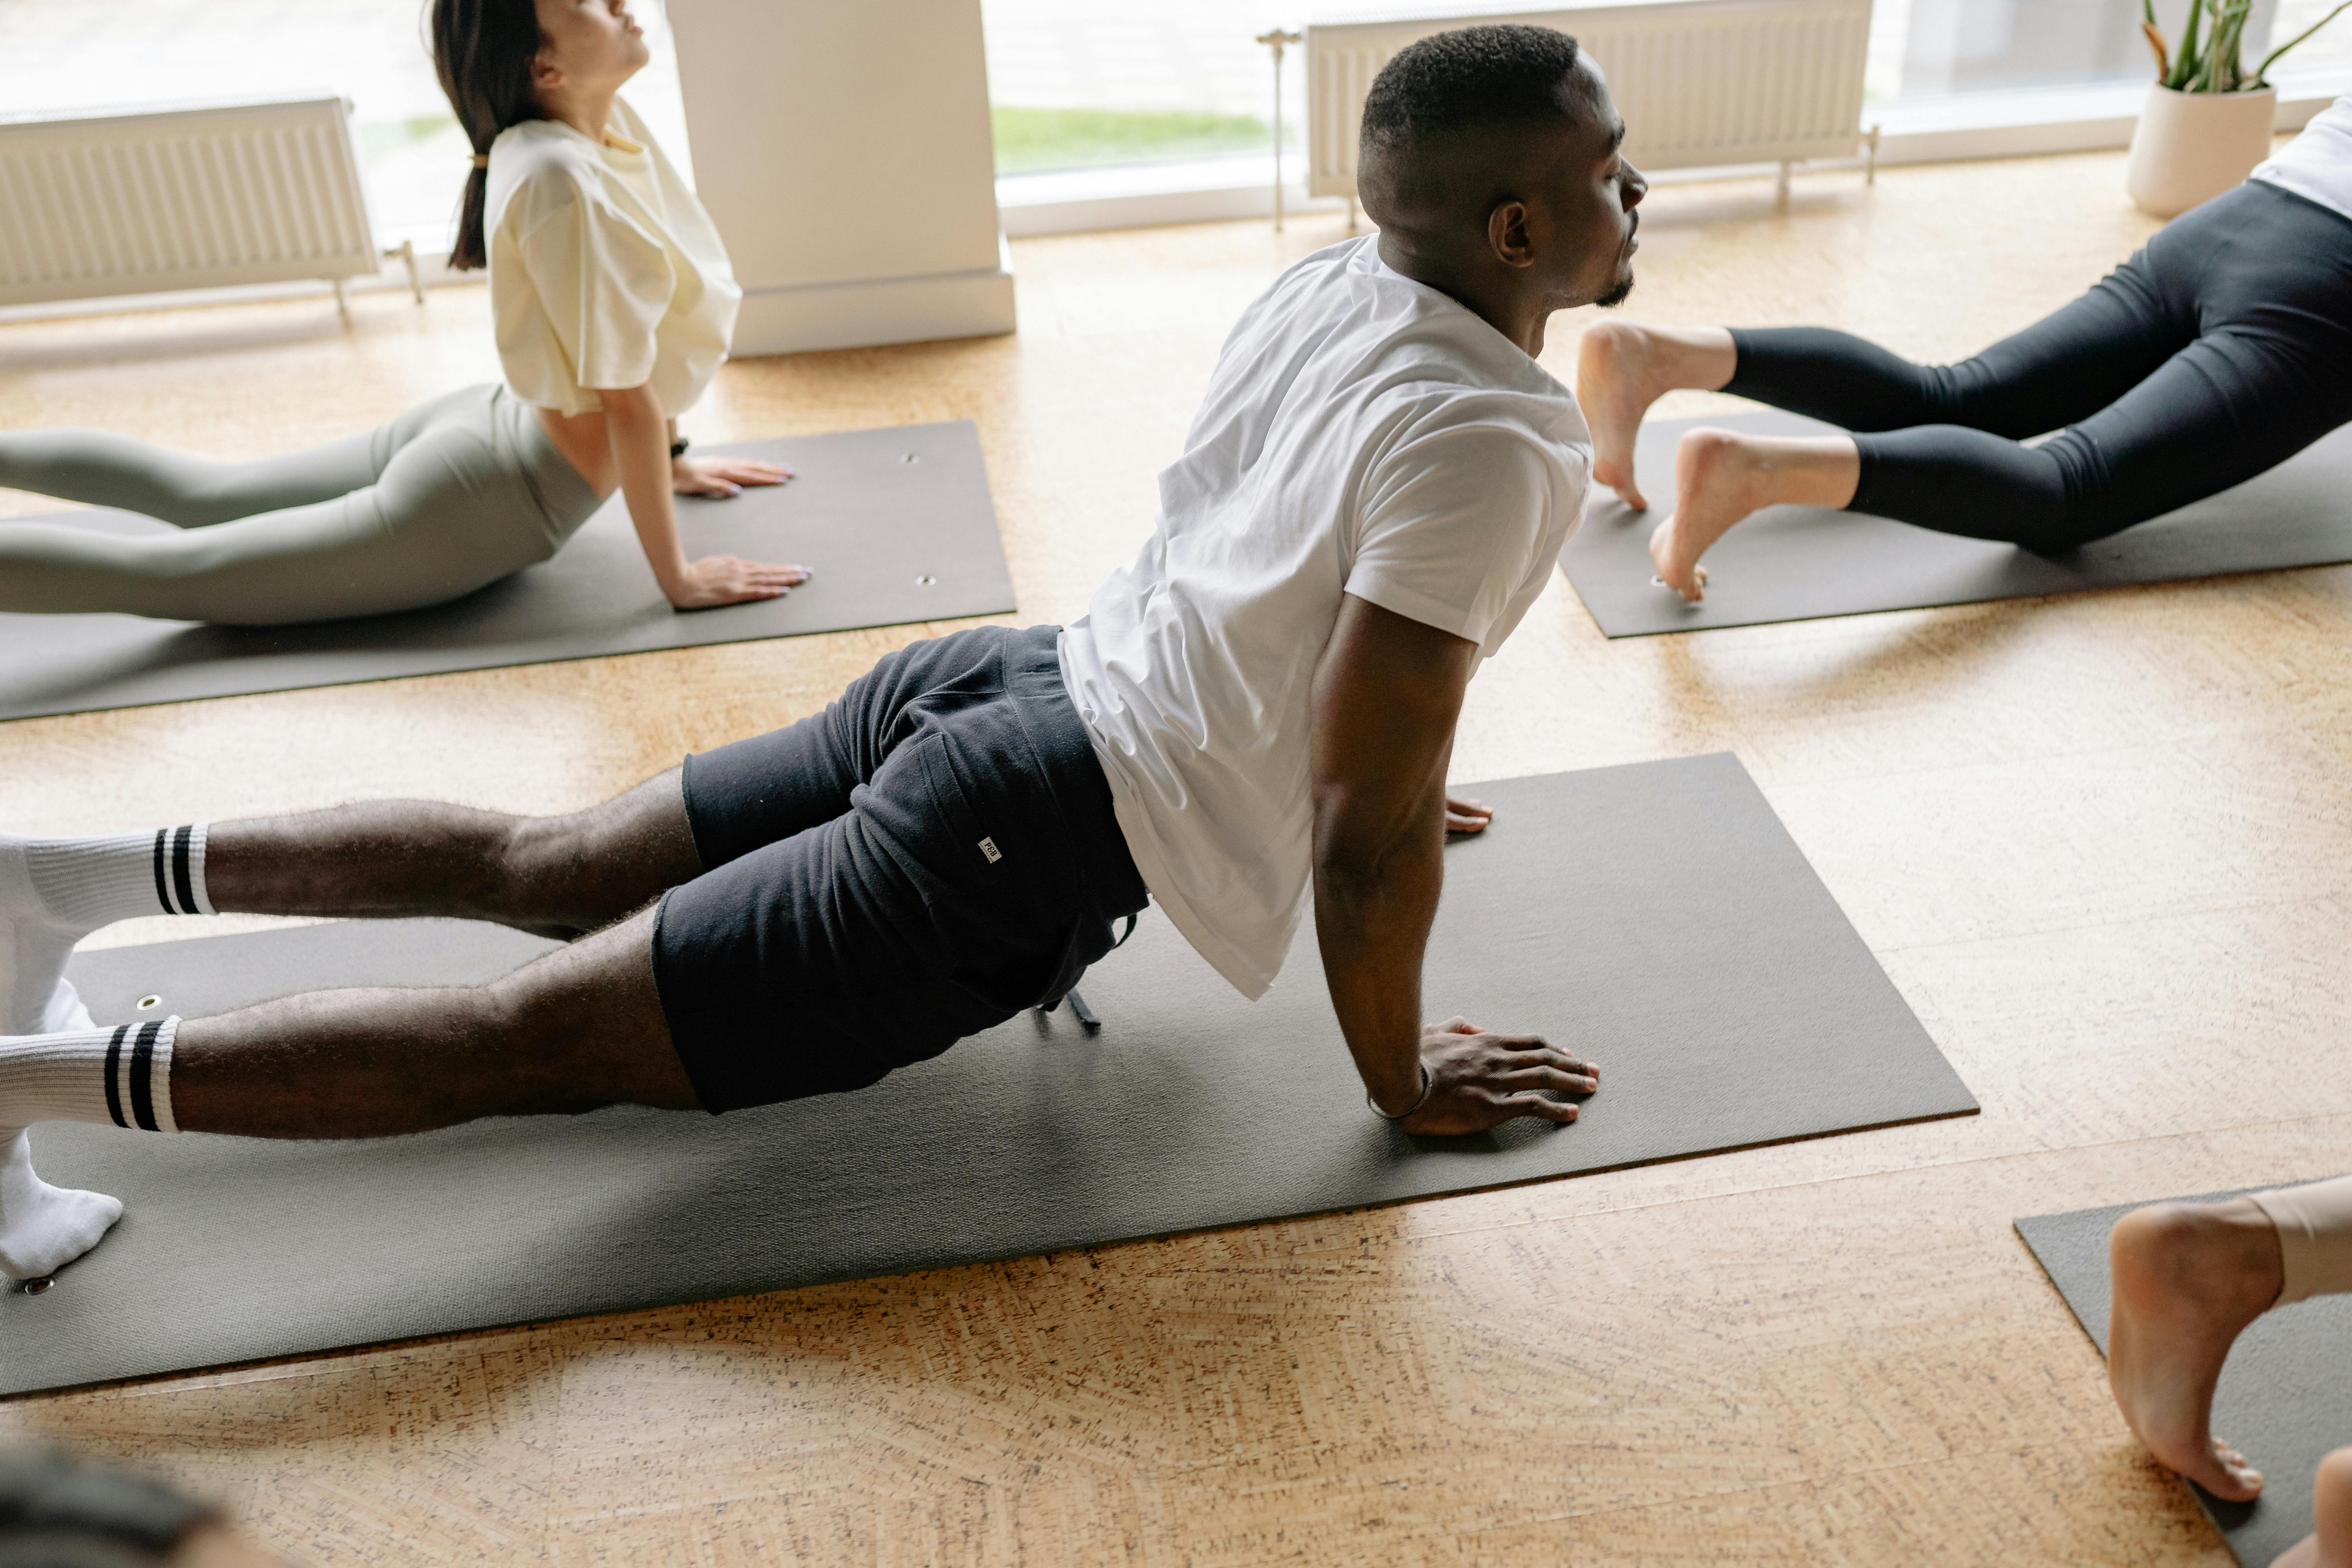 A group of people doing a yoga pose on a yoga mat